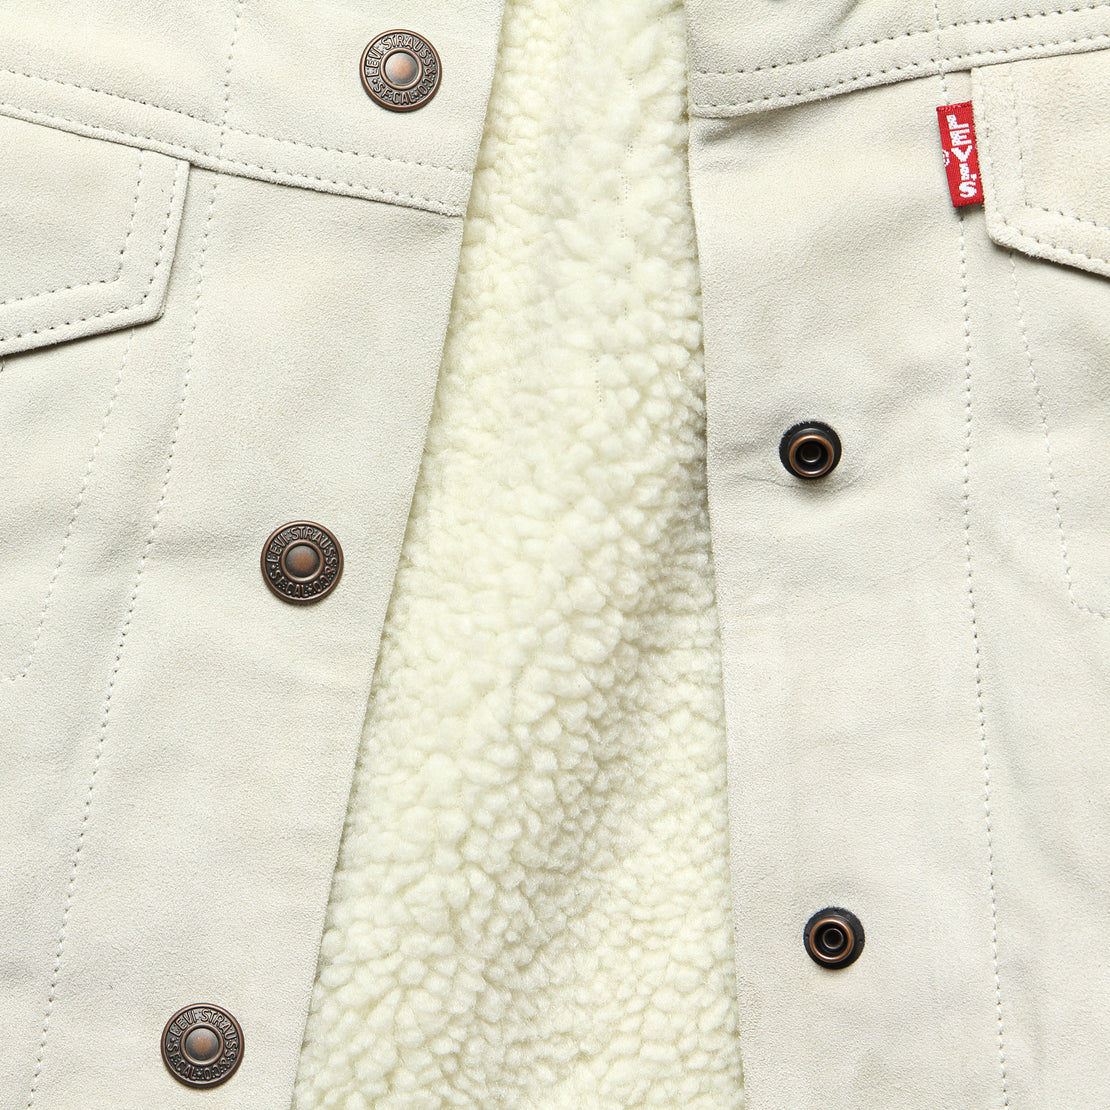 Suede Sherpa Trucker Jacket - Pumice Stone - Levis Premium - STAG Provisions - W - Outerwear - Coat/Jacket